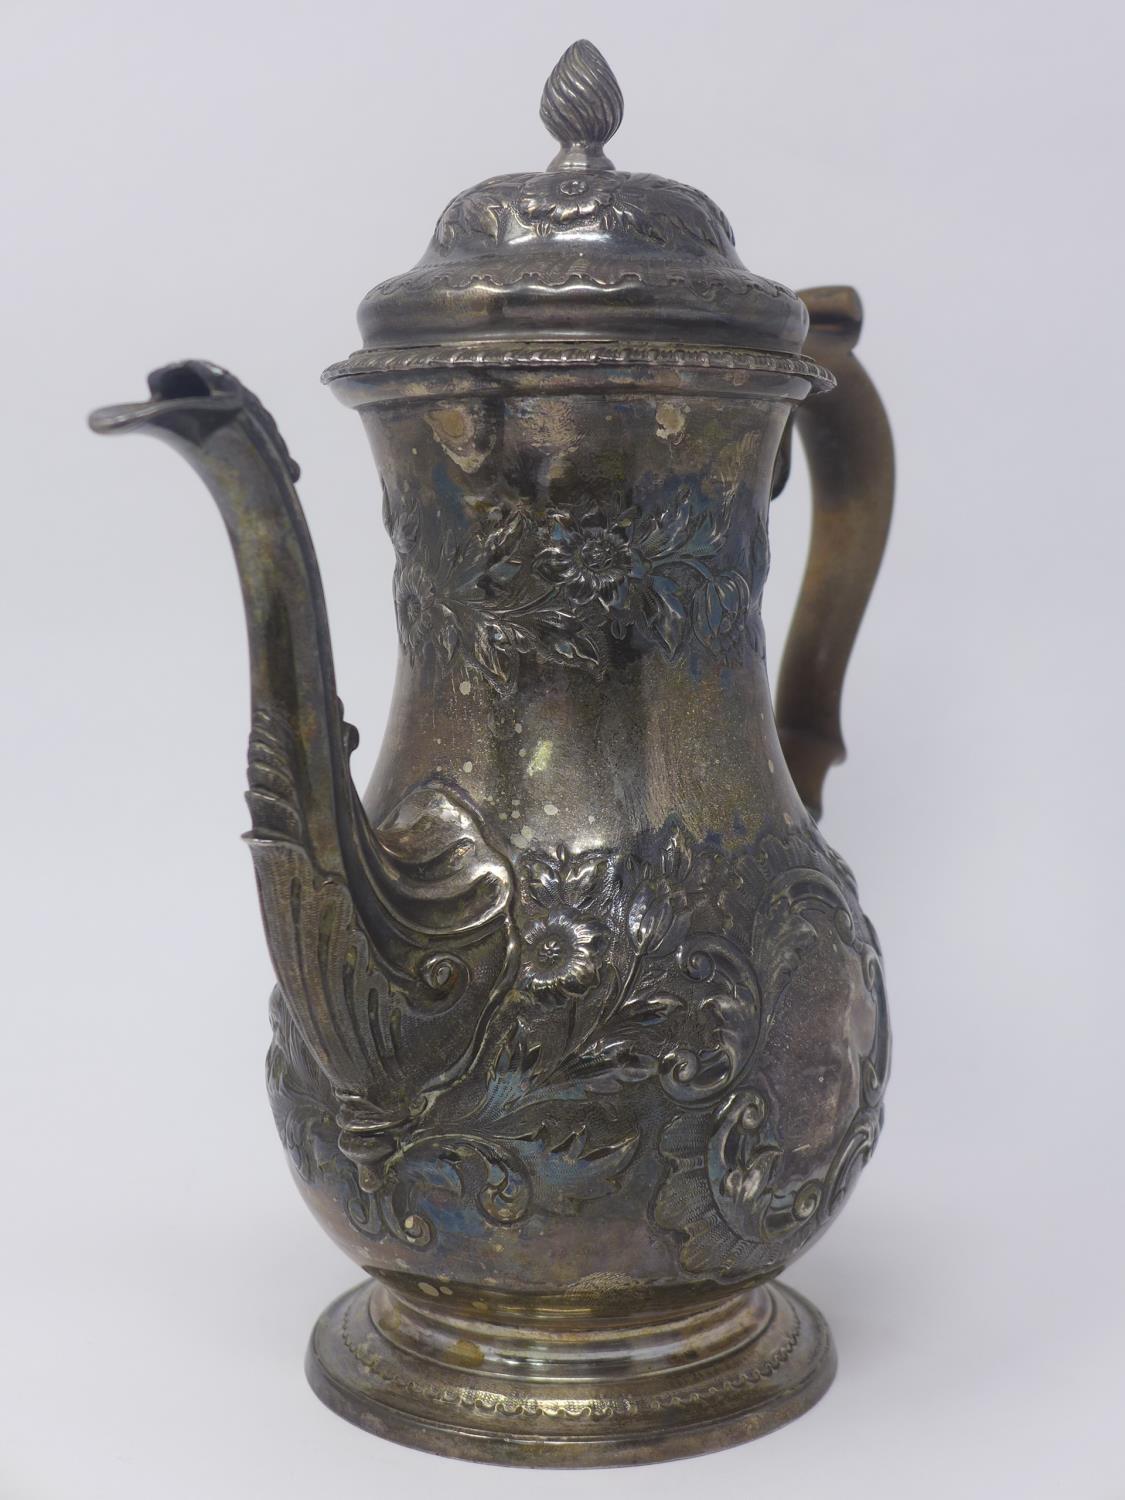 WITHDRAWN - A George III silver tea pot with embossed floral decoration, dated 1762, H.25cm, 25oz - Image 4 of 4